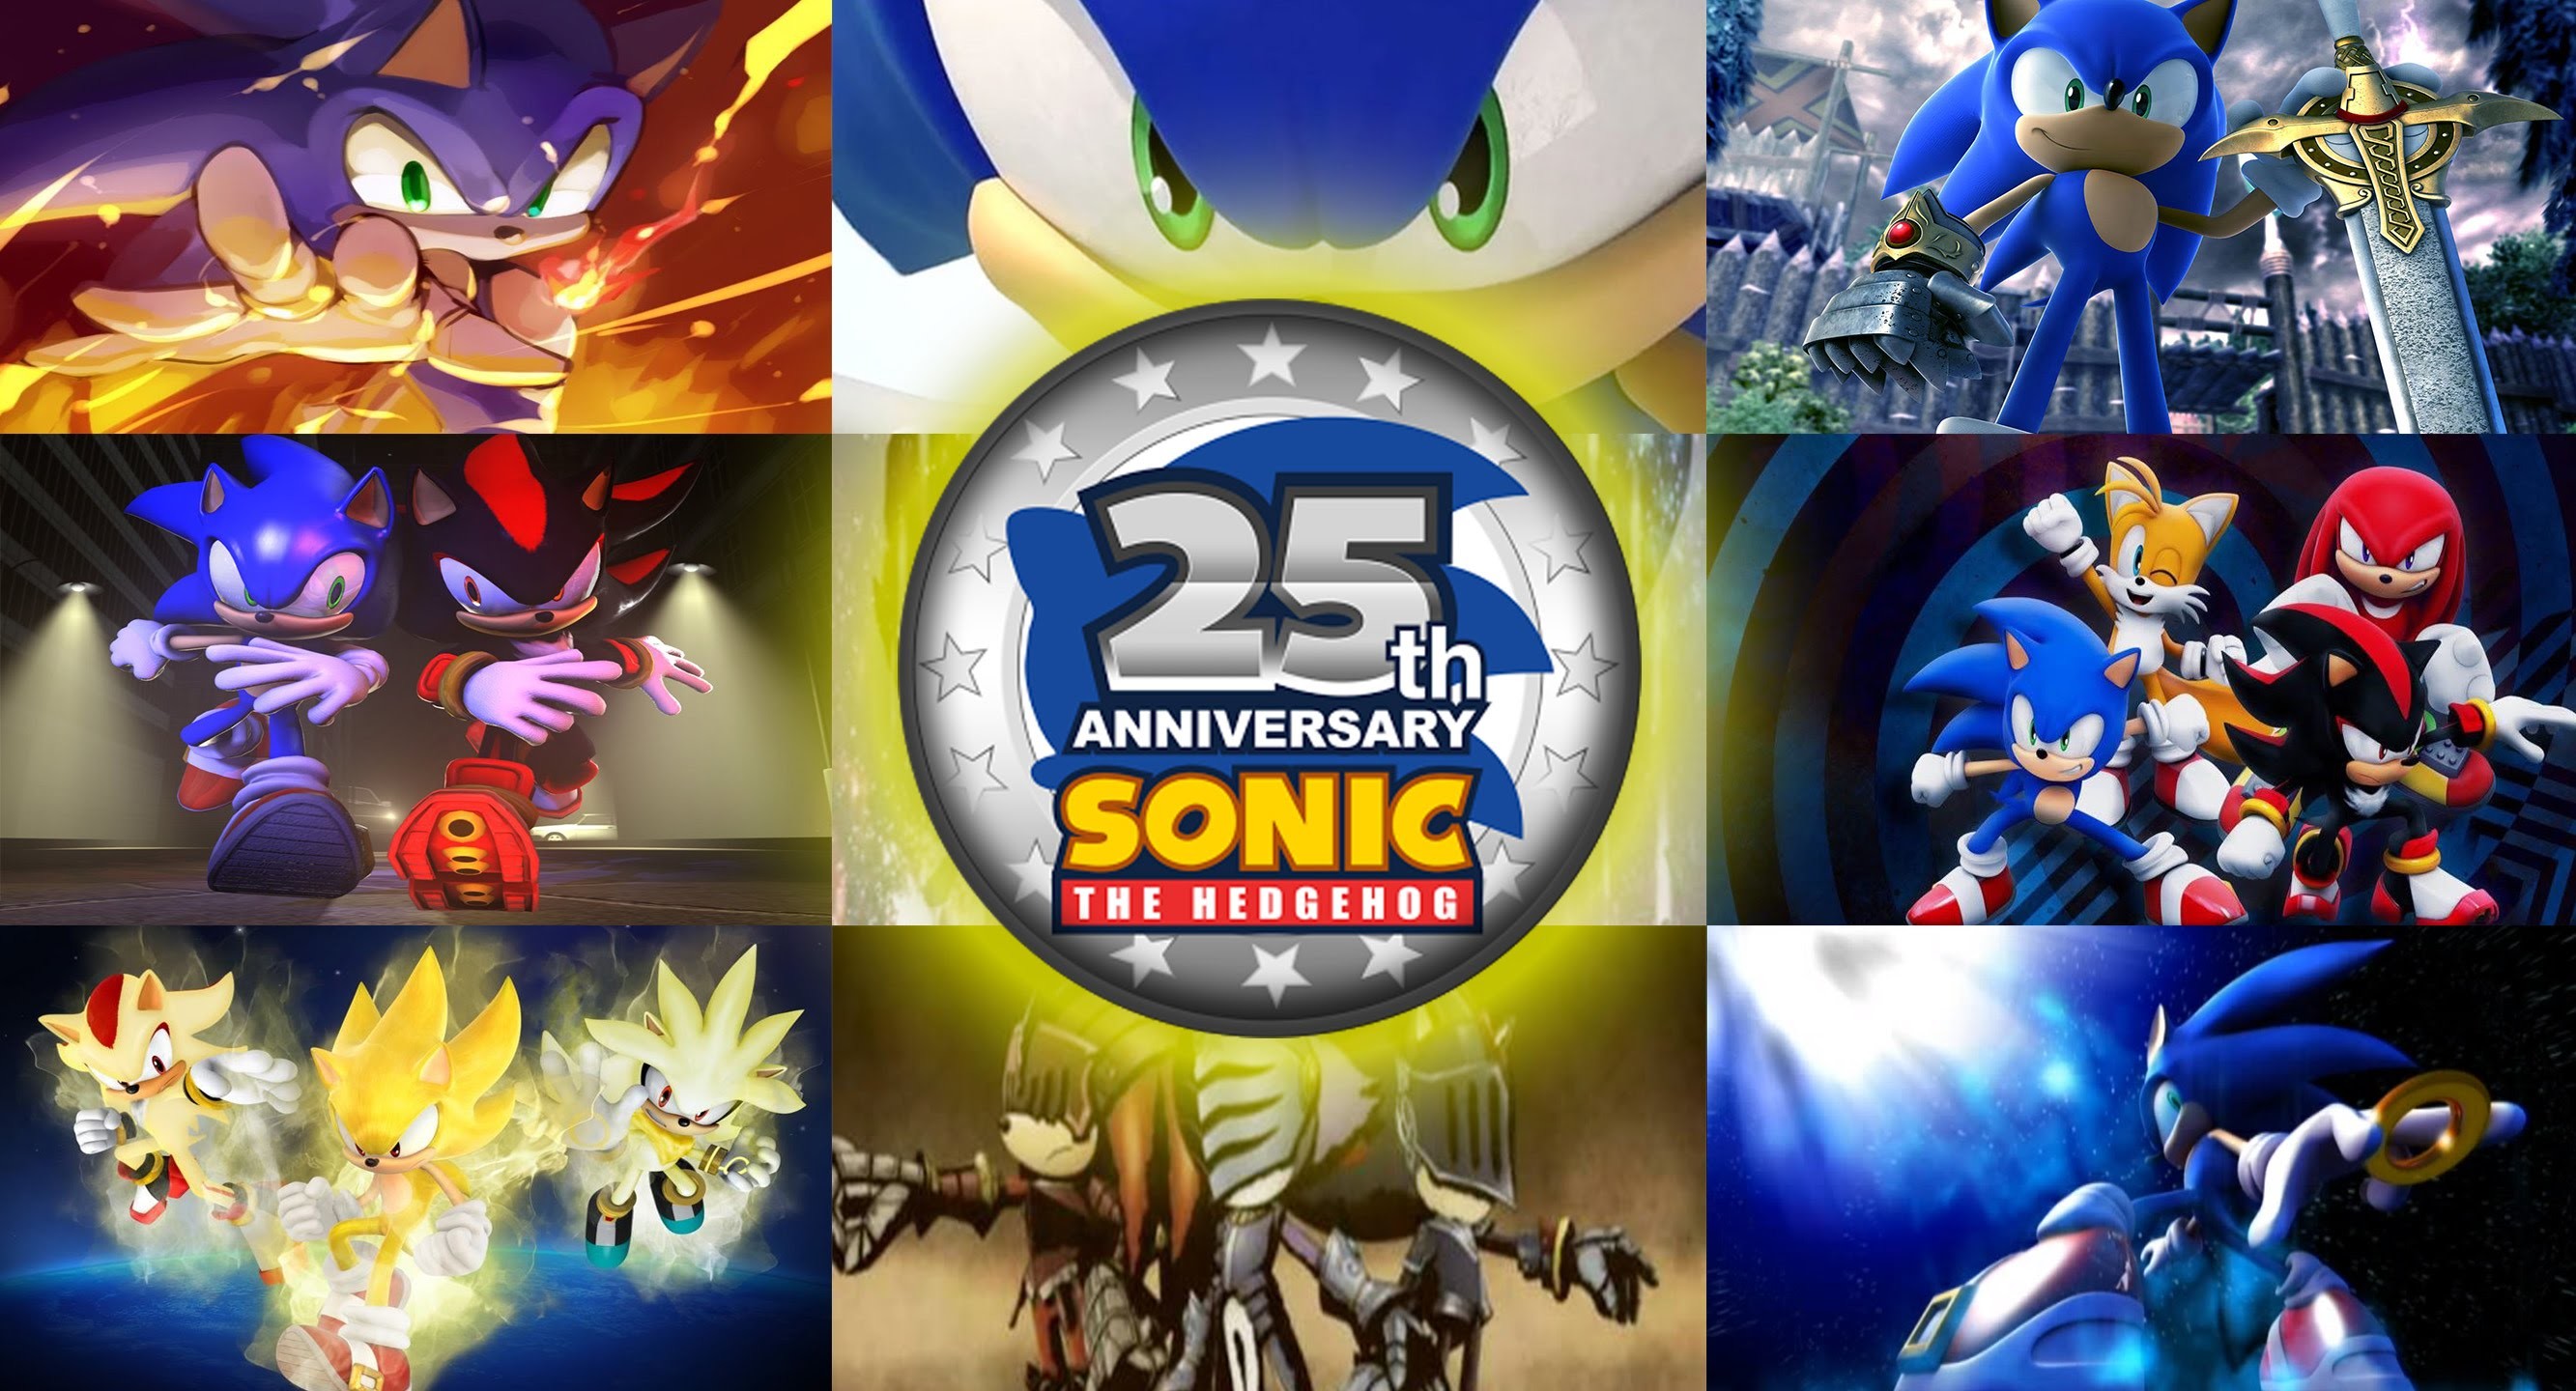 2666x1440 Sonic The Hedgehog - ((Especial 25th ANNIVERSARY)) "Sonic Youth" - YouTube